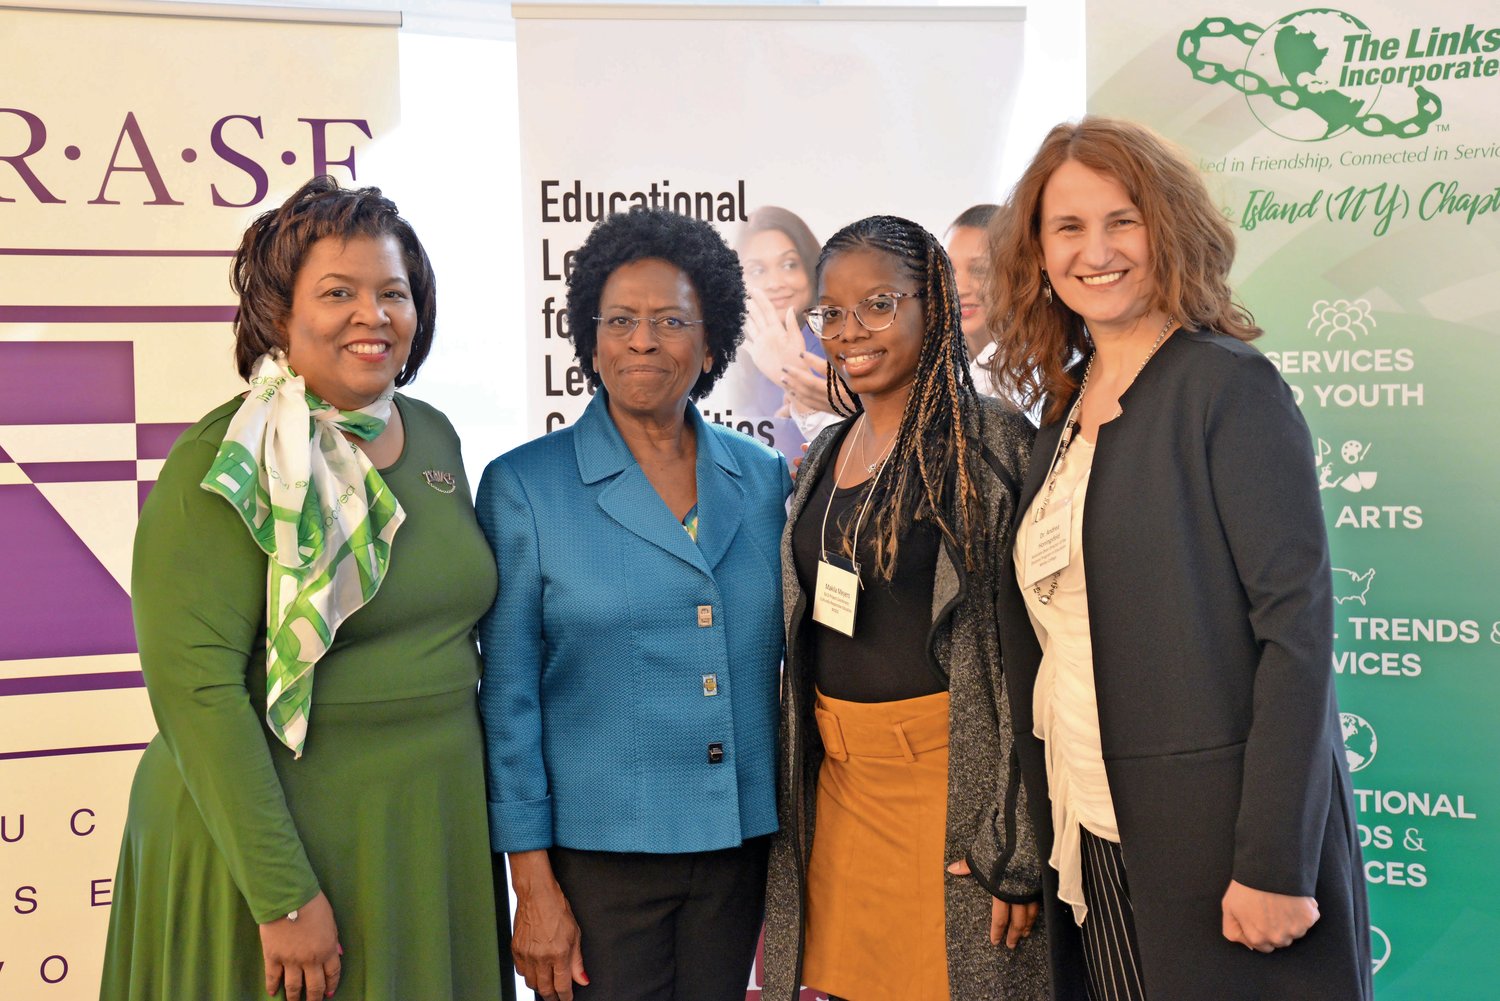 Leah E. Watson, president of The Links Incorporated Long Island Chapter, far left; Elaine Gross, president of ERASE Racism; Dr. Makila Meyers, of the New York State Education Department; and Andrea Honigsfeld, associate dean and director of Molloy College’s Doctoral Program in Education, attended the event.